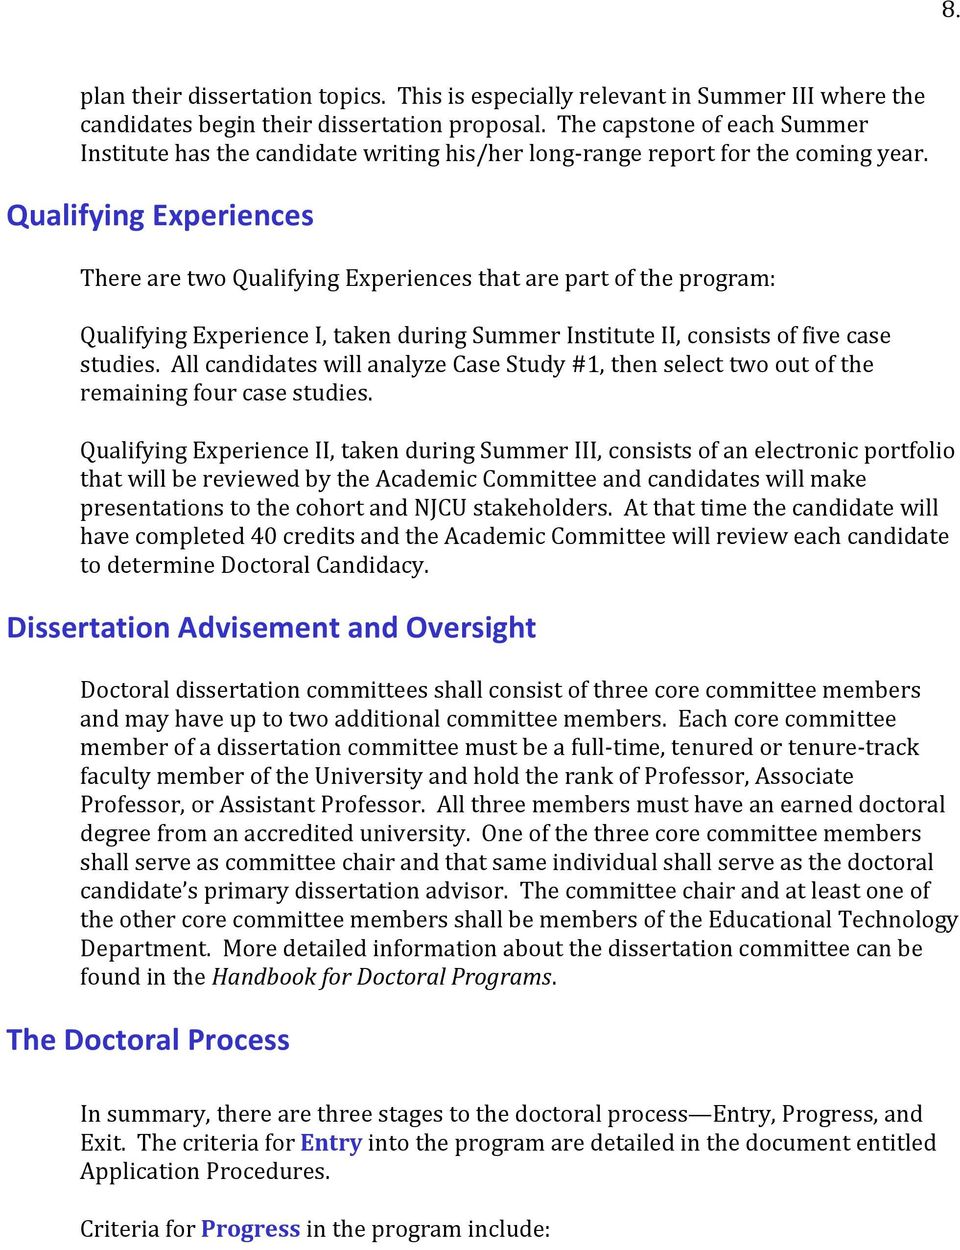 Qualifying Experiences There are two Qualifying Experiences that are part of the program: Qualifying Experience I, taken during Summer Institute II, consists of five case studies.